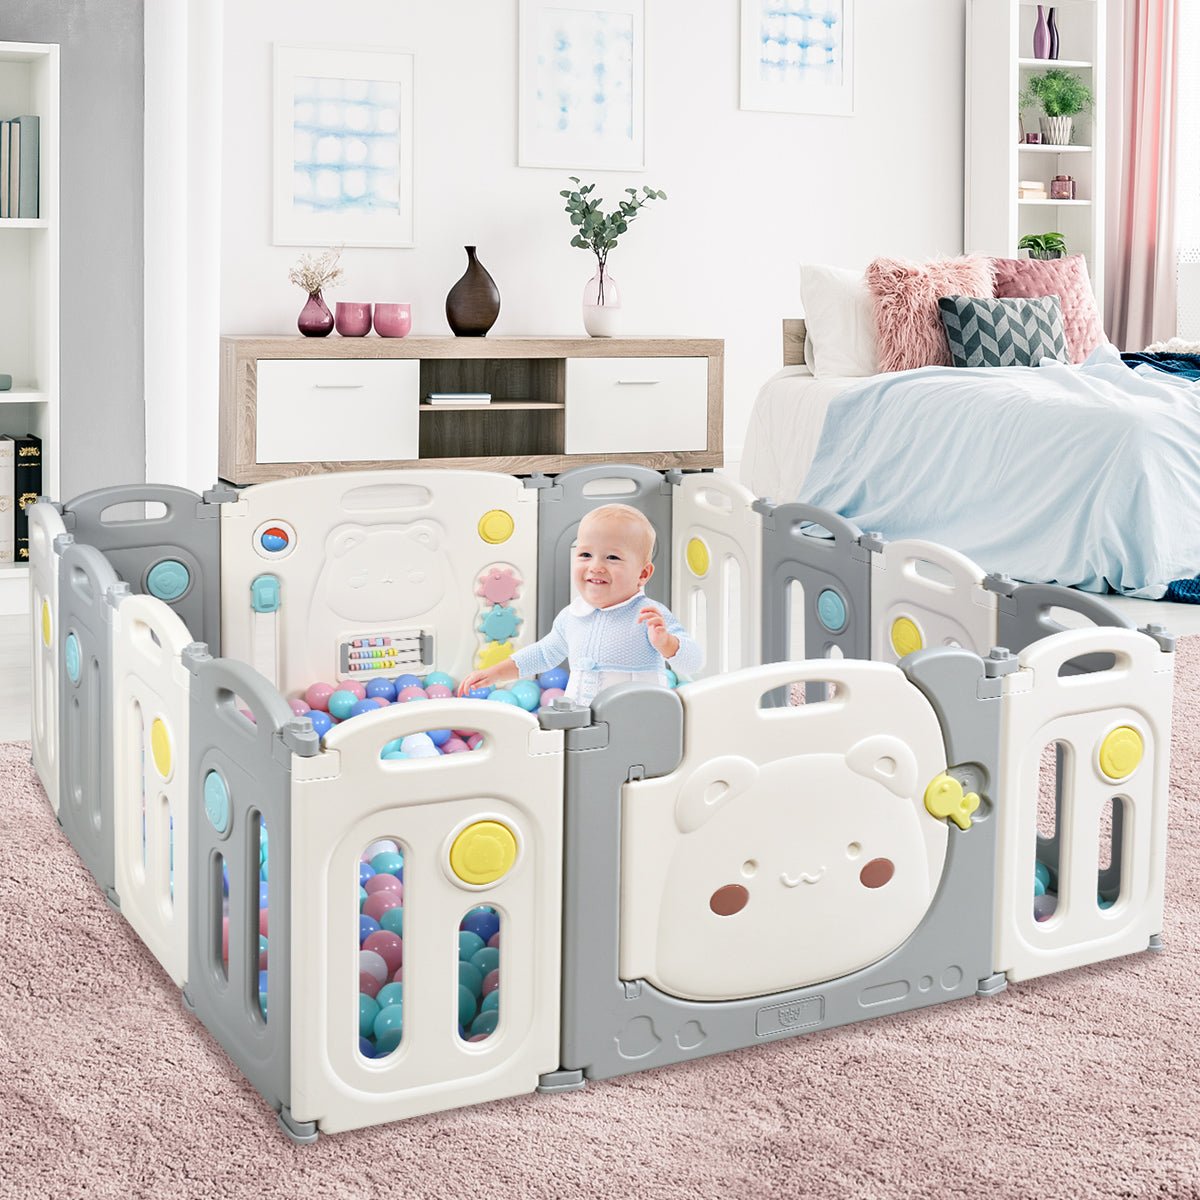 Child's Playpen with Safety Lock and Educational Toys